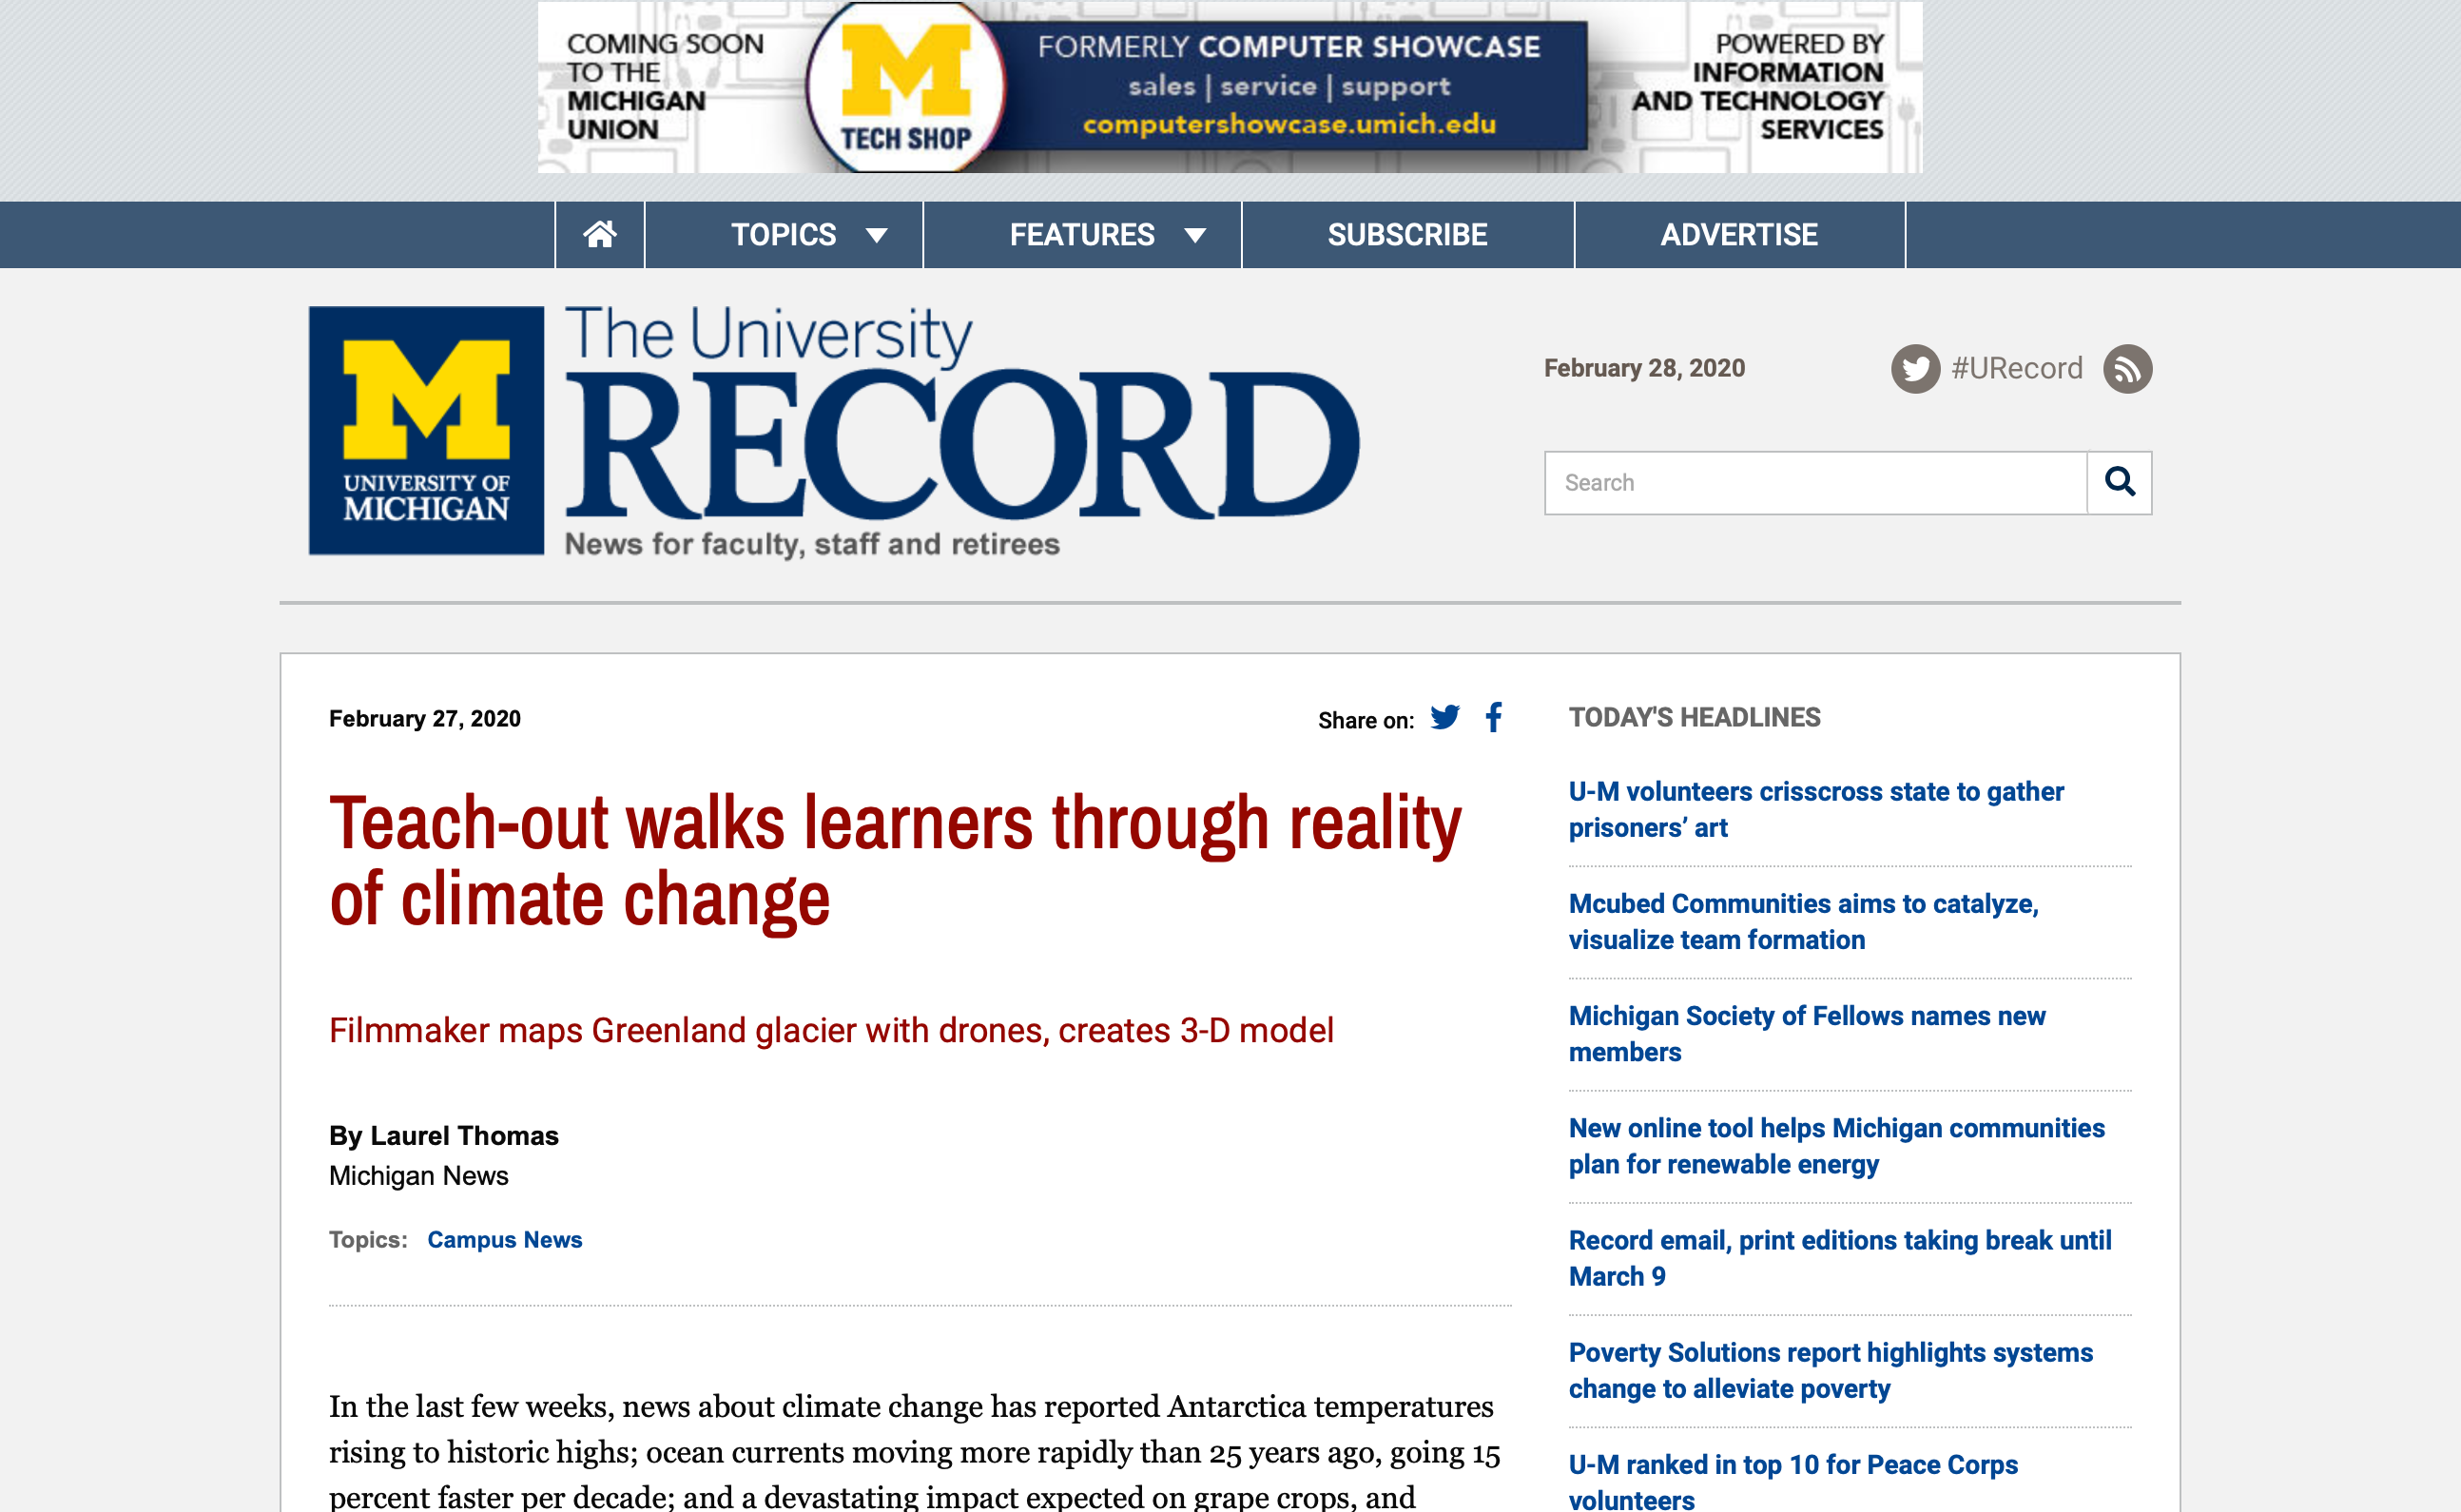 Teach-out walks learners through reality of climate change